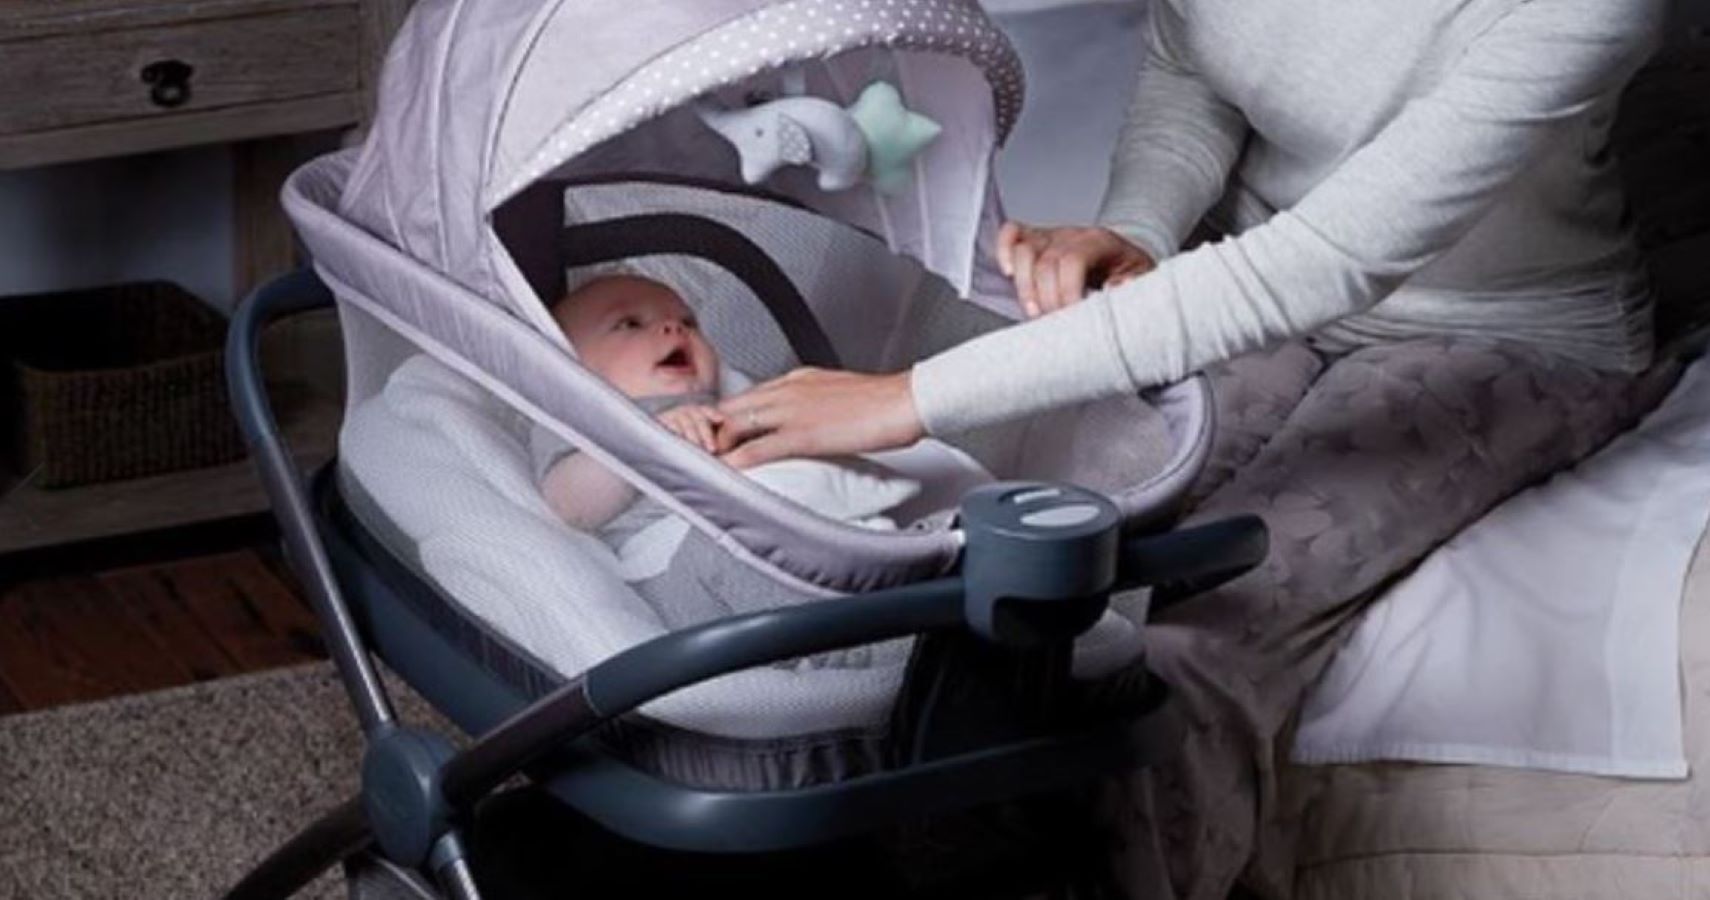 Graco recalls inclined sleeper accessory due to suffocation risk